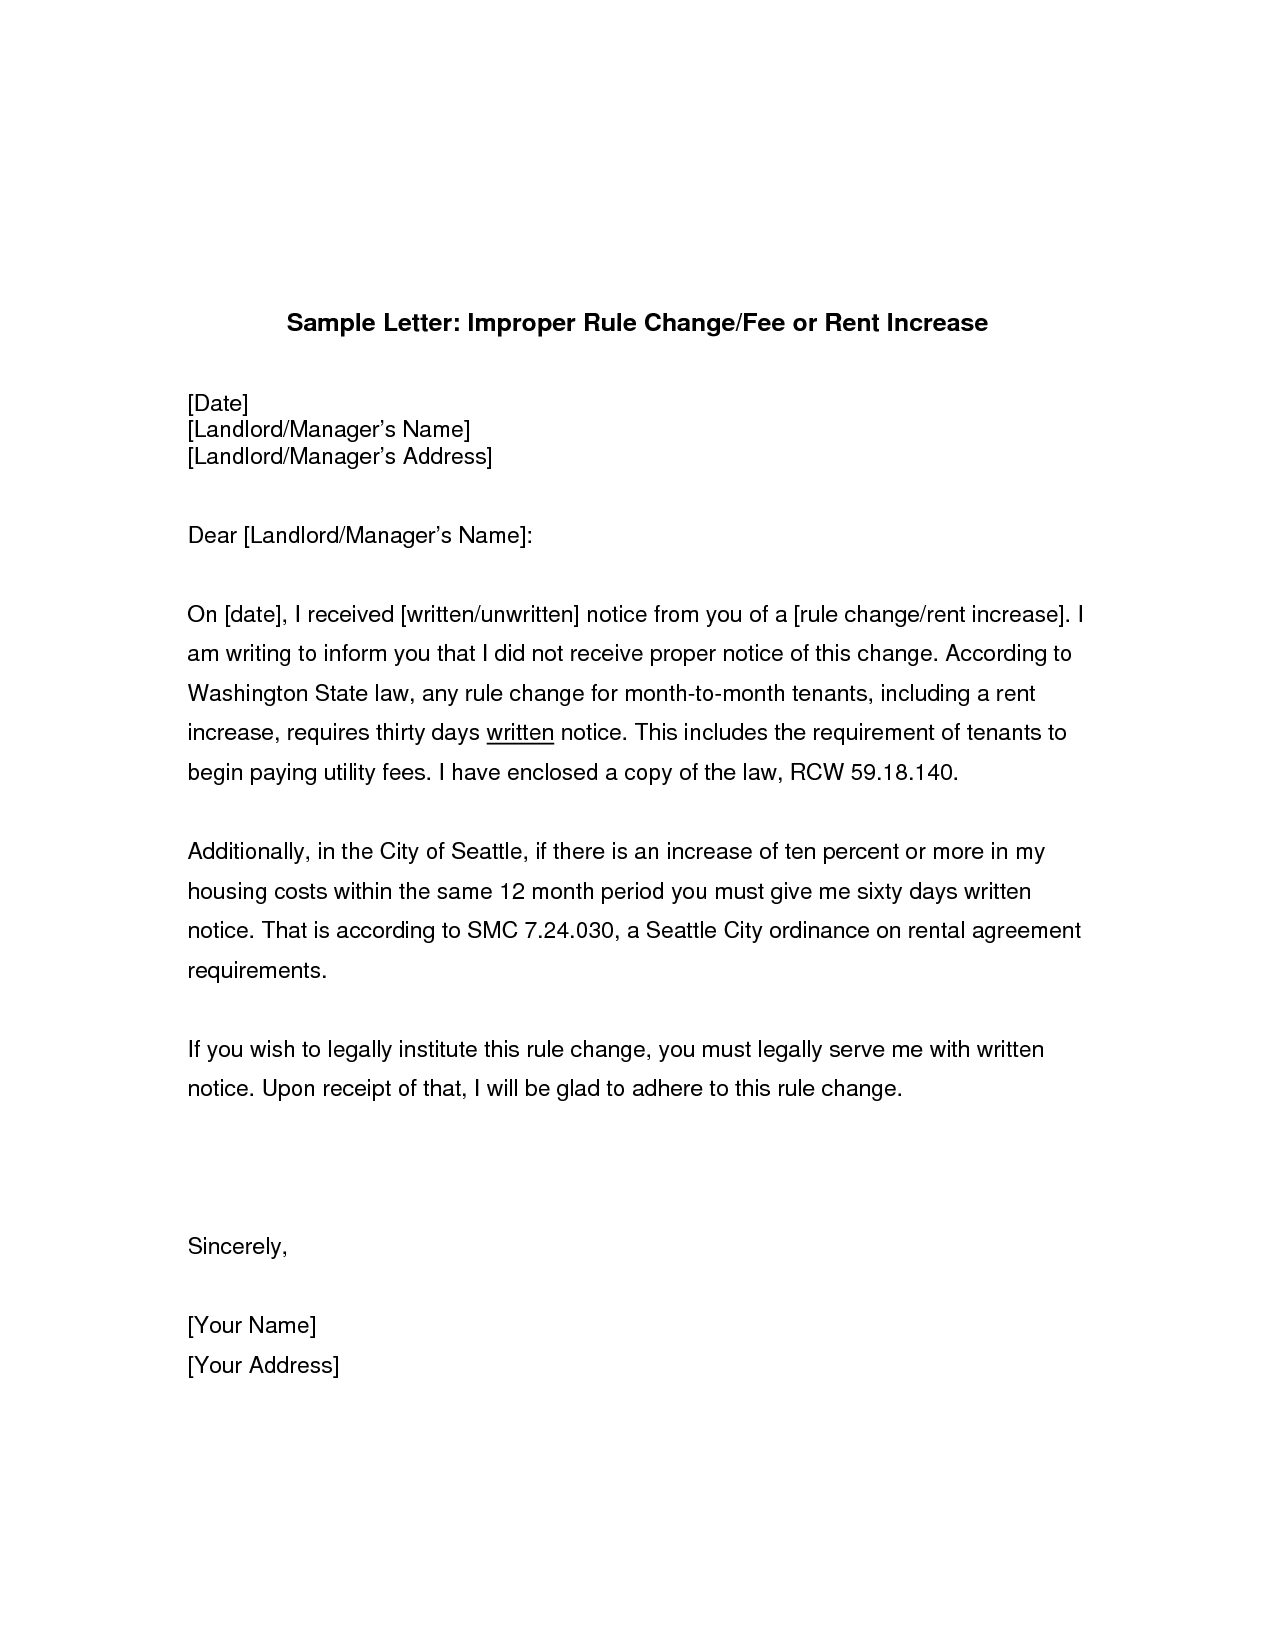 Lease Extension Letter Template - Rent Increase Sample Letter Legal Documents